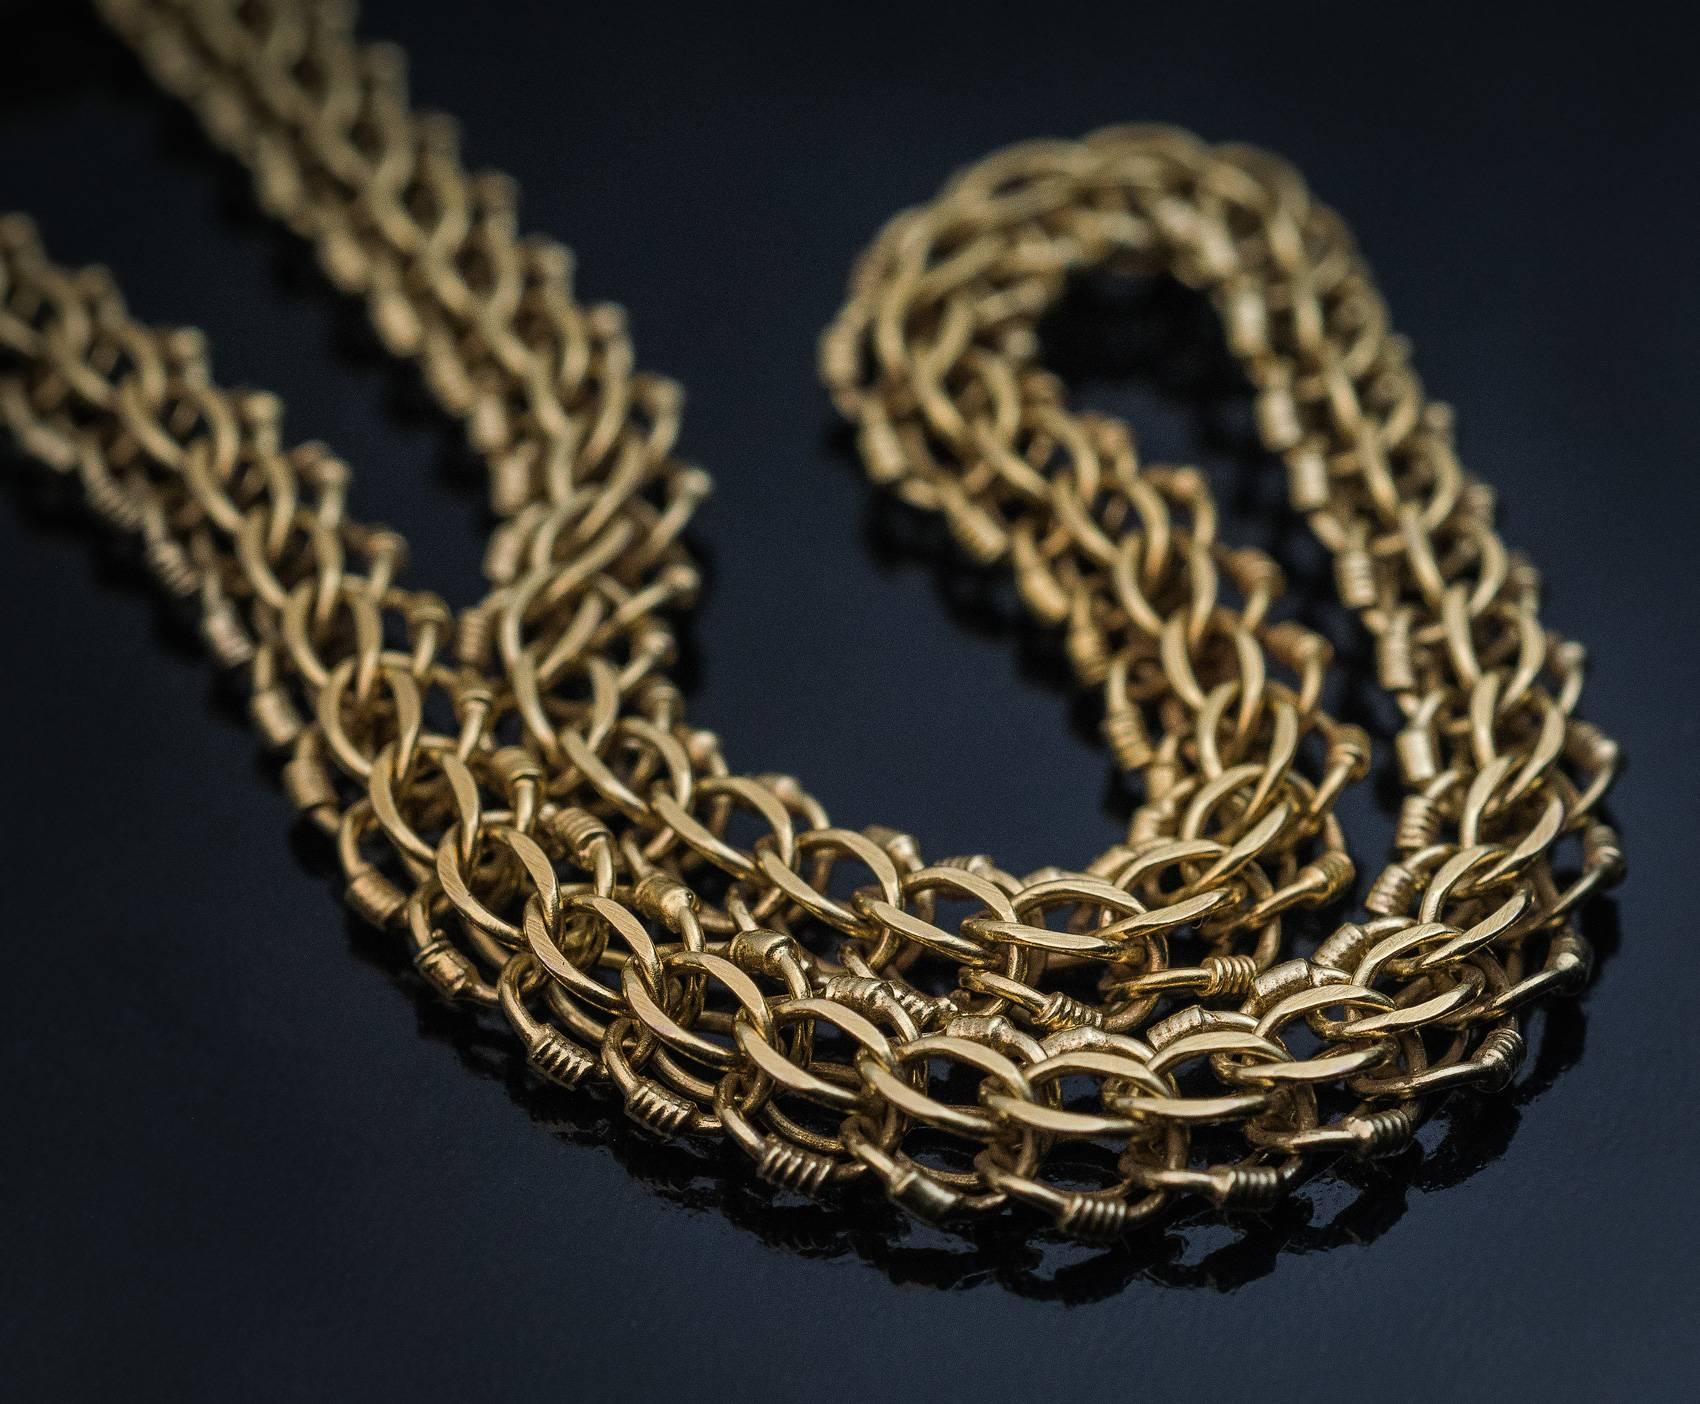 This fine and heavy woven gold necklace was made in Moscow between 1908 and 1917. It is marked with 56 zolotnik (14K) Imperial gold standard, maker’s mark, and later Soviet control mark for 583 gold standard from the 1930s.
Length 205 cm (80.7